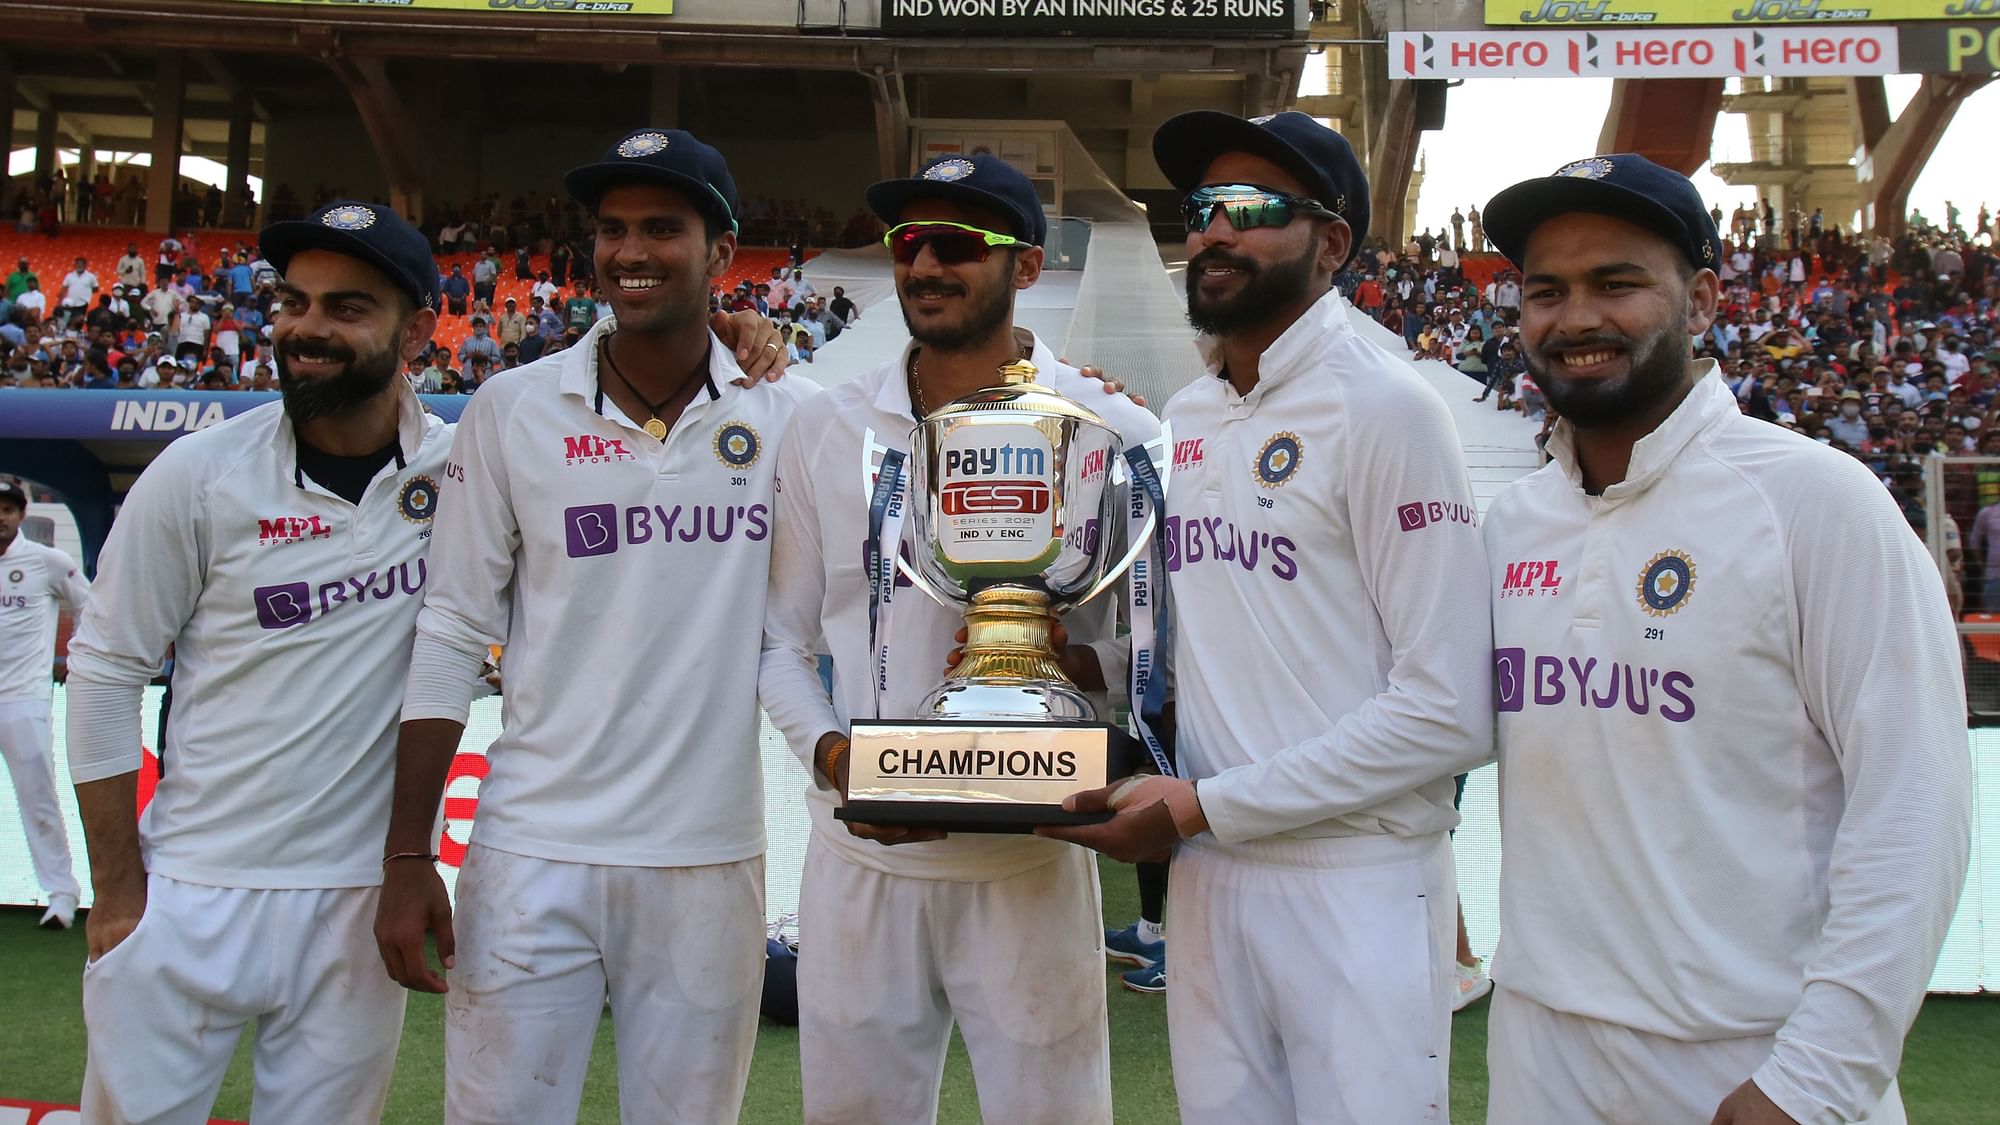 India registered their 13th consecutive Test series win at home when they beat England in the fourth Test.